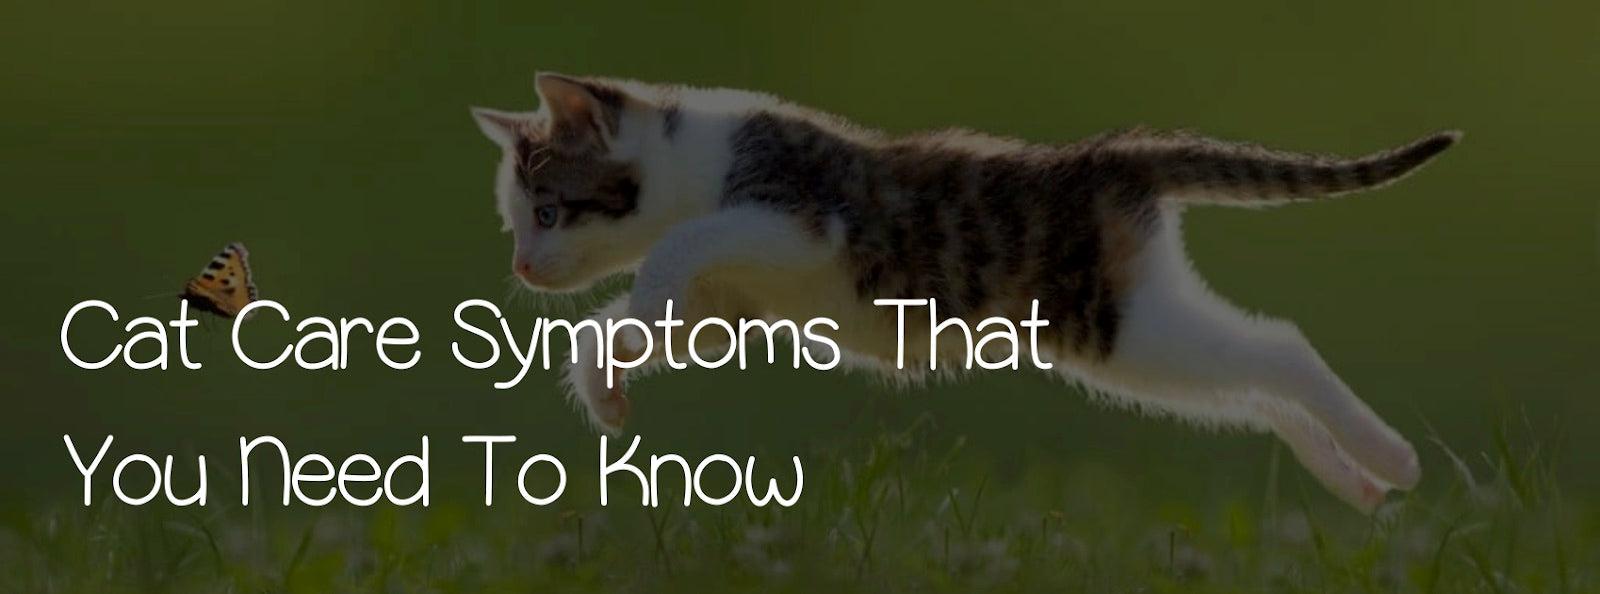 CAT CARE: SYMPTOMS THAT YOU NEED TO KNOW